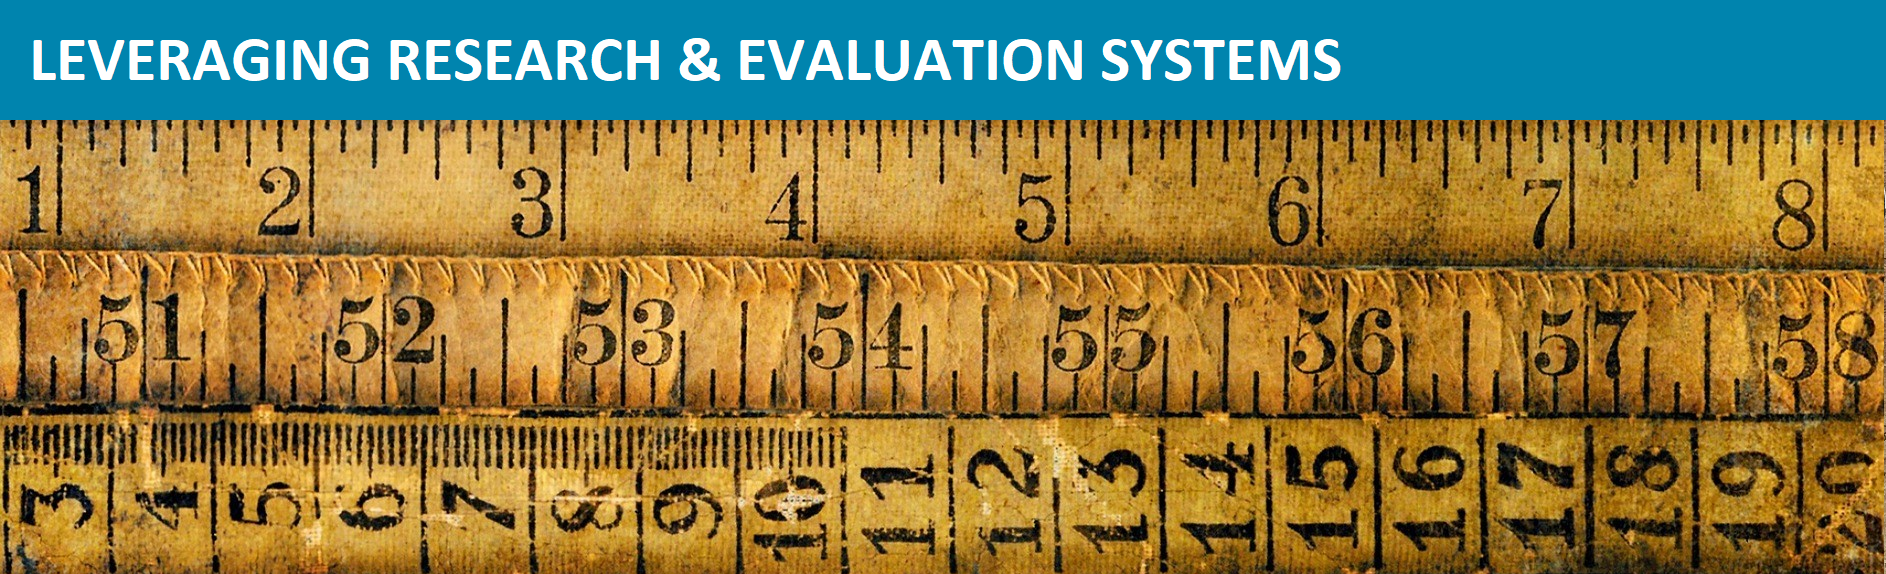 LEVERAGING RESEARCH & EVALUATION SYSTEMS